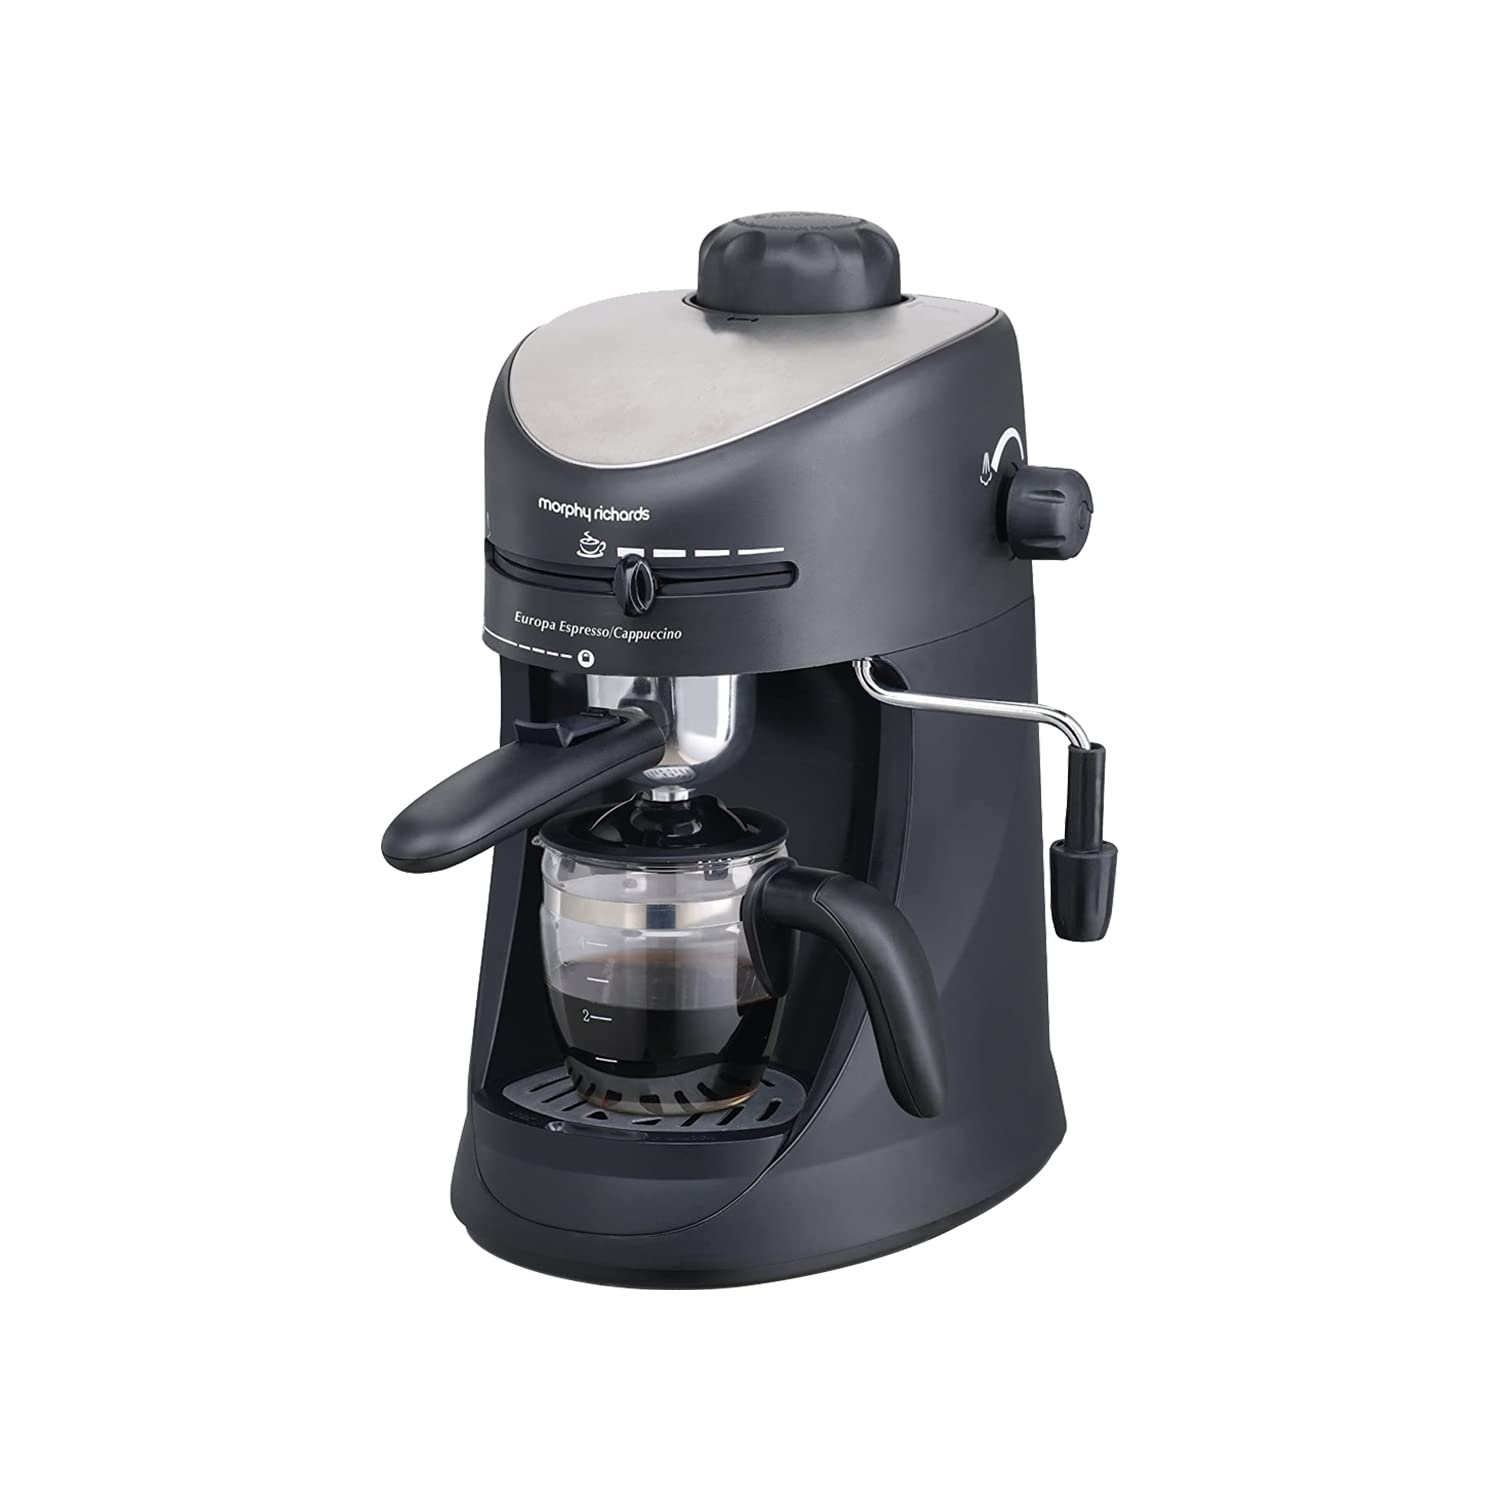 4 Coffee Makers to Make your Mornings Perfect